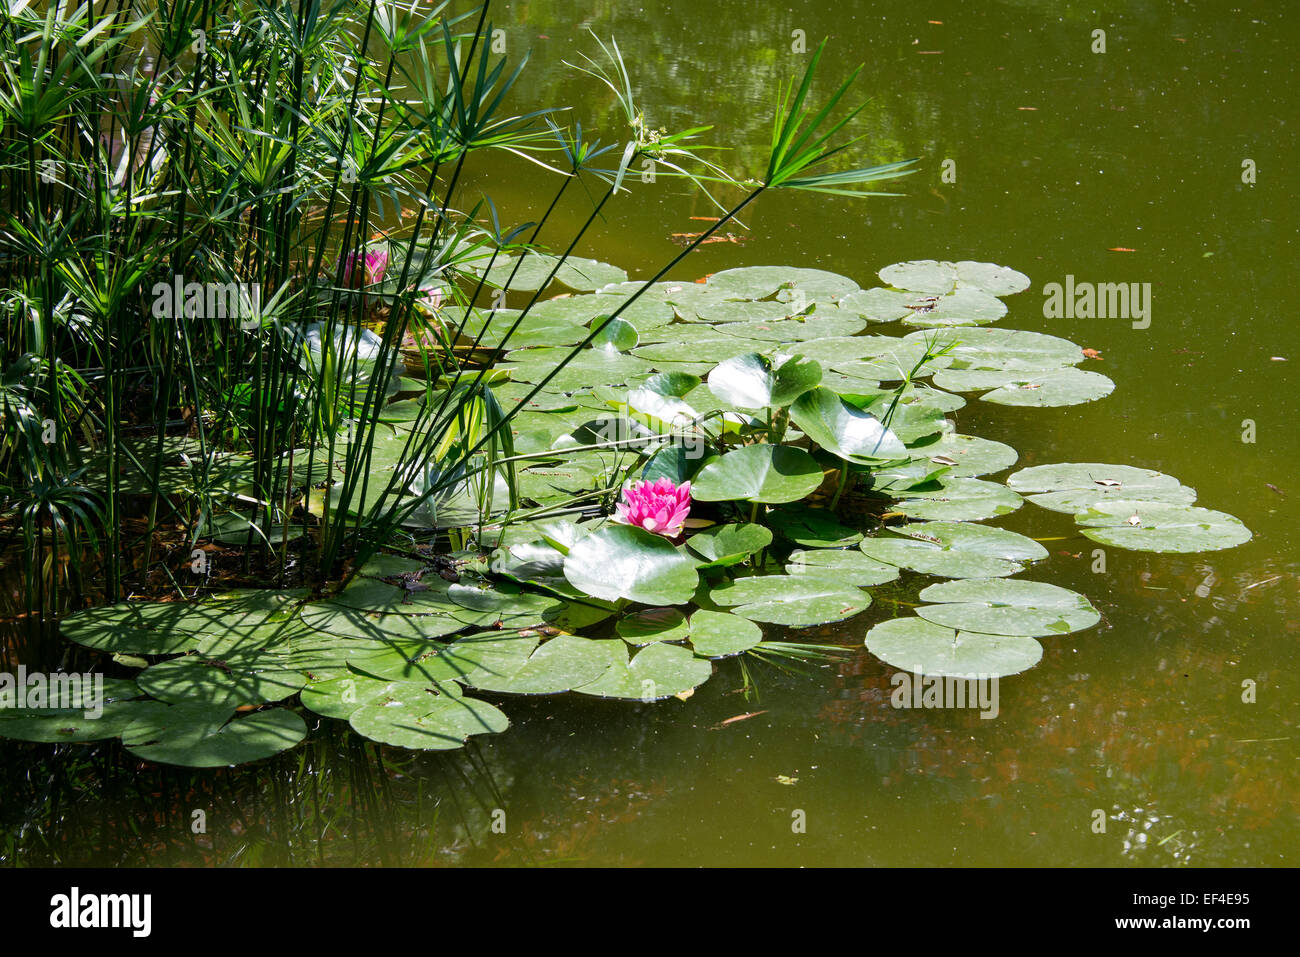 Garden pond with water lilies or lotus flowers Stock Photo